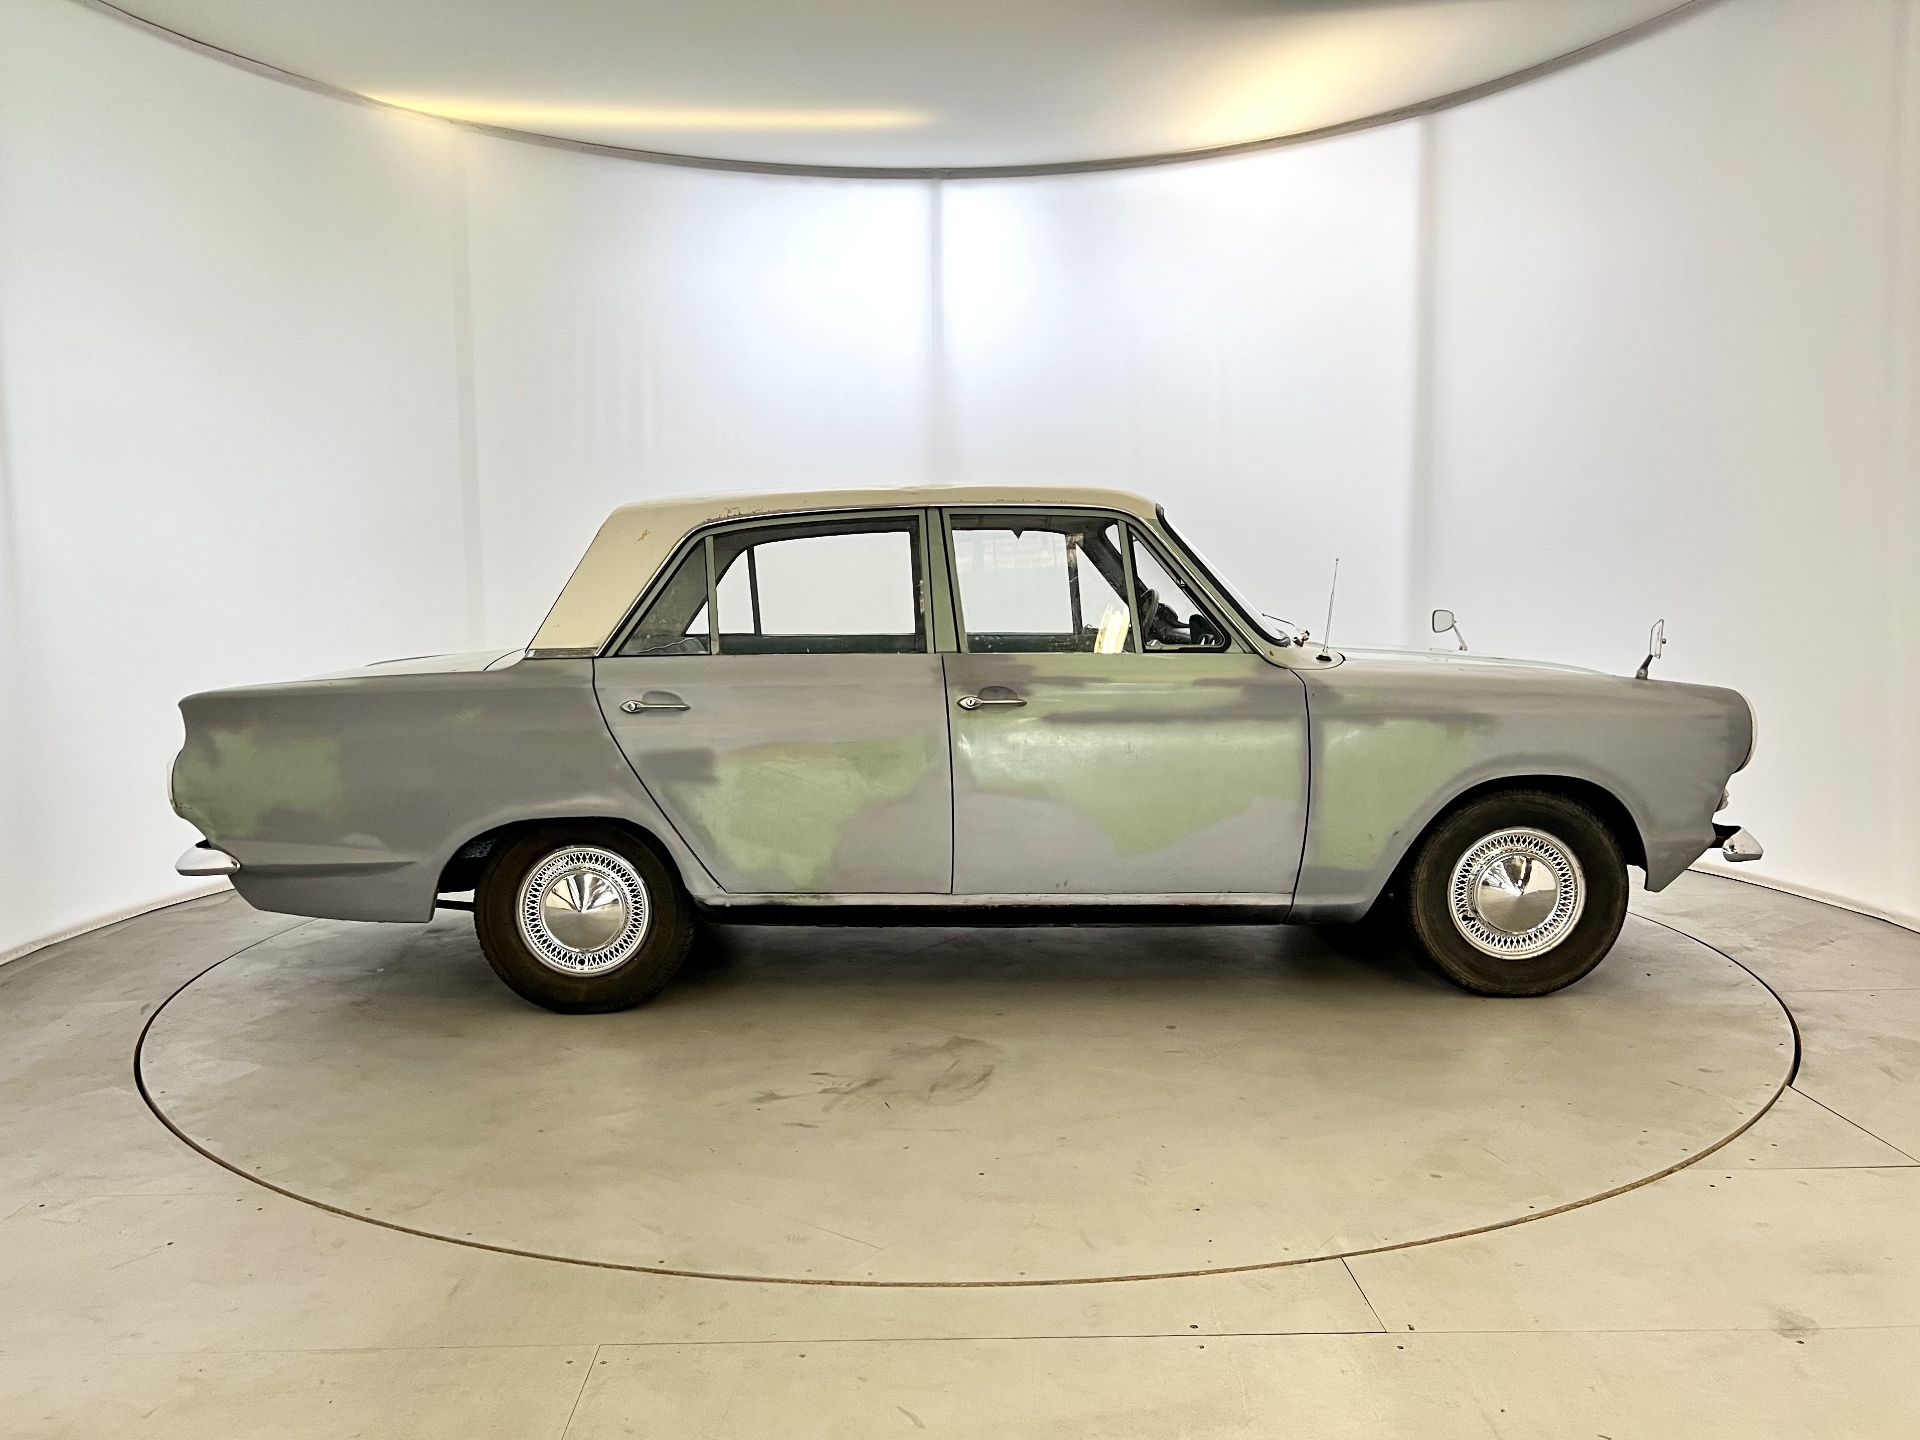 Ford Cortina Deluxe - Image 11 of 31